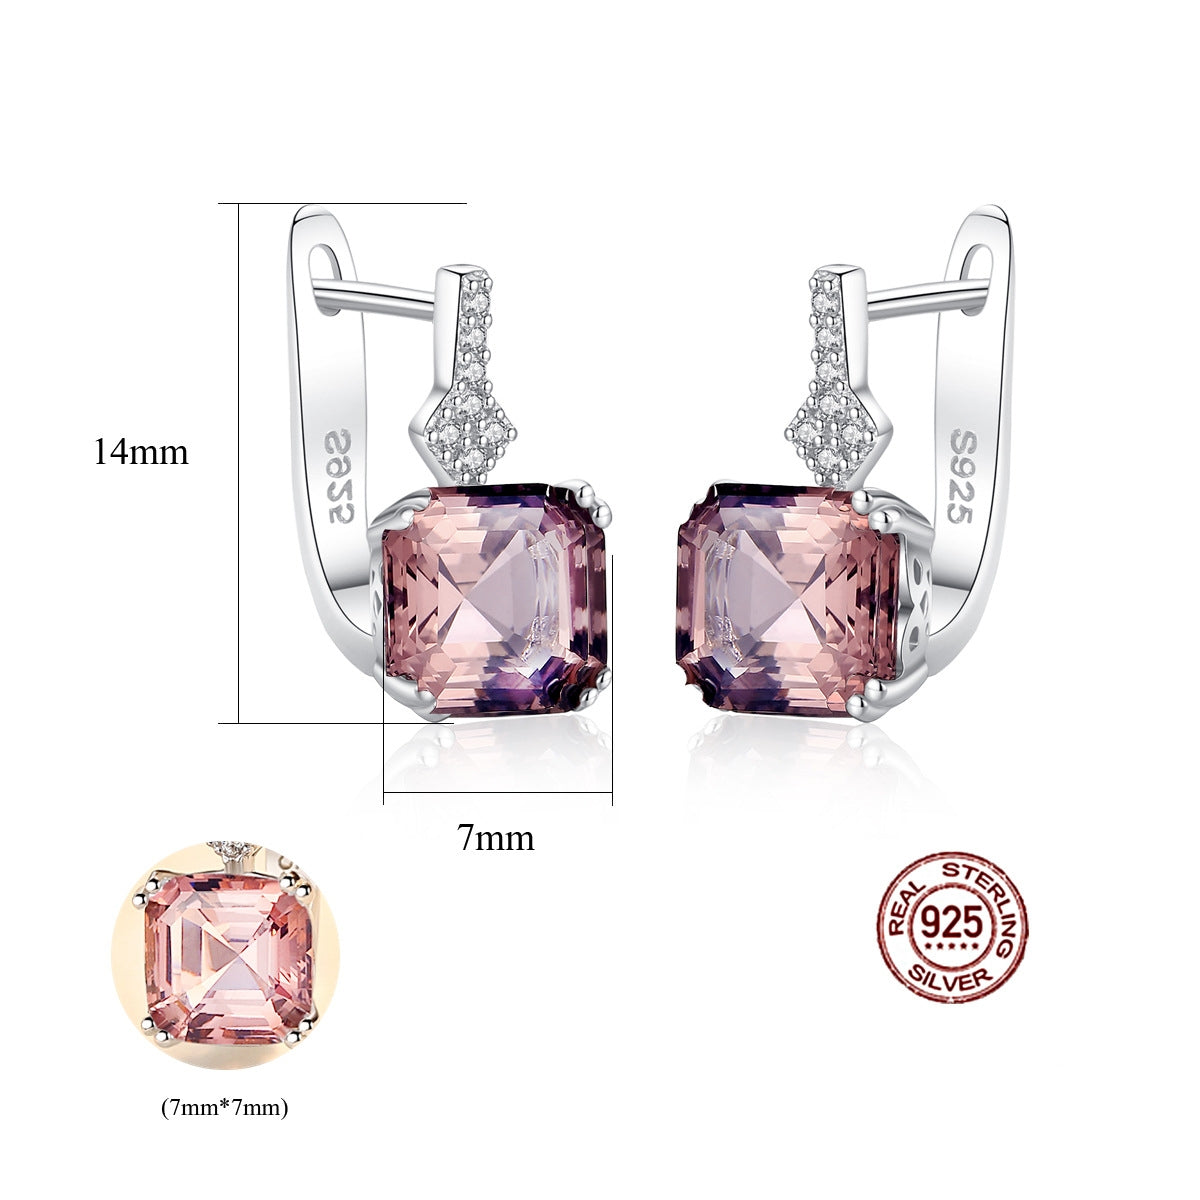 Cherry Blossom Pink High Clarity Color Jewel Morgan Stone Earrings -SE0108